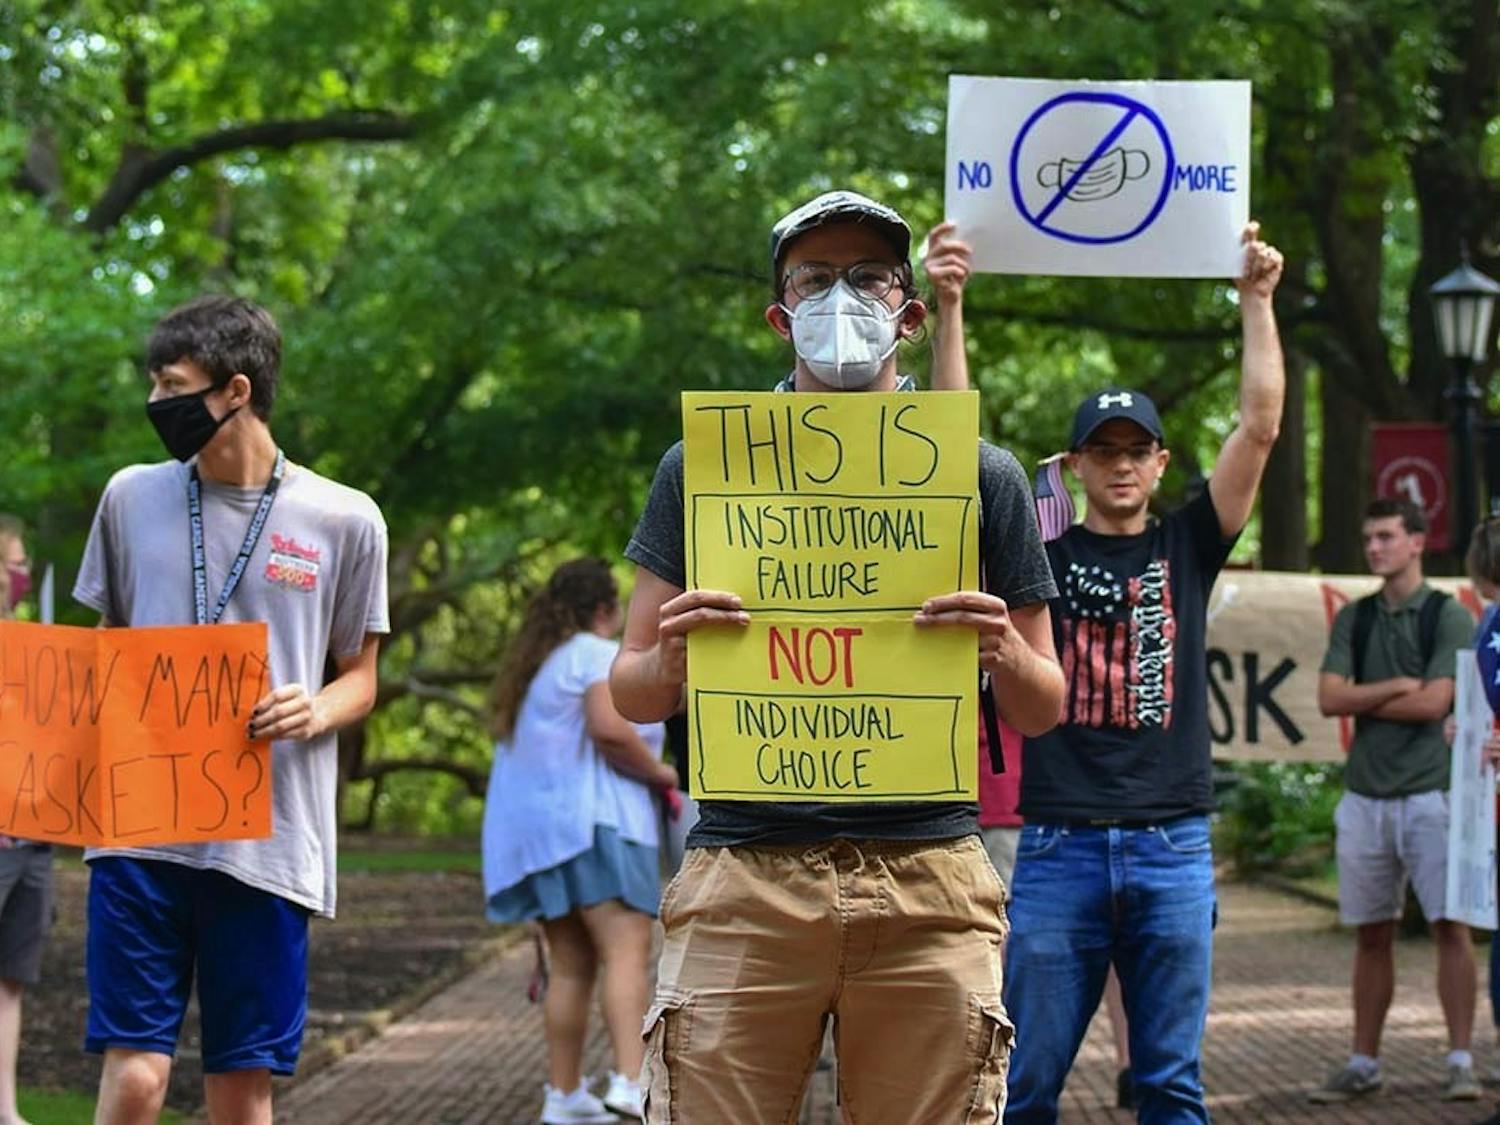 Two members of Carolina Socialists stand on the Horseshoe, holding signs while a member of the USC Turning Point USA chapter stands behind them with an anti-mask poster. Turning Point USA protested the mask mandate outside the President's House, and the Carolina Socialists counterprotested the anti-mask messages.